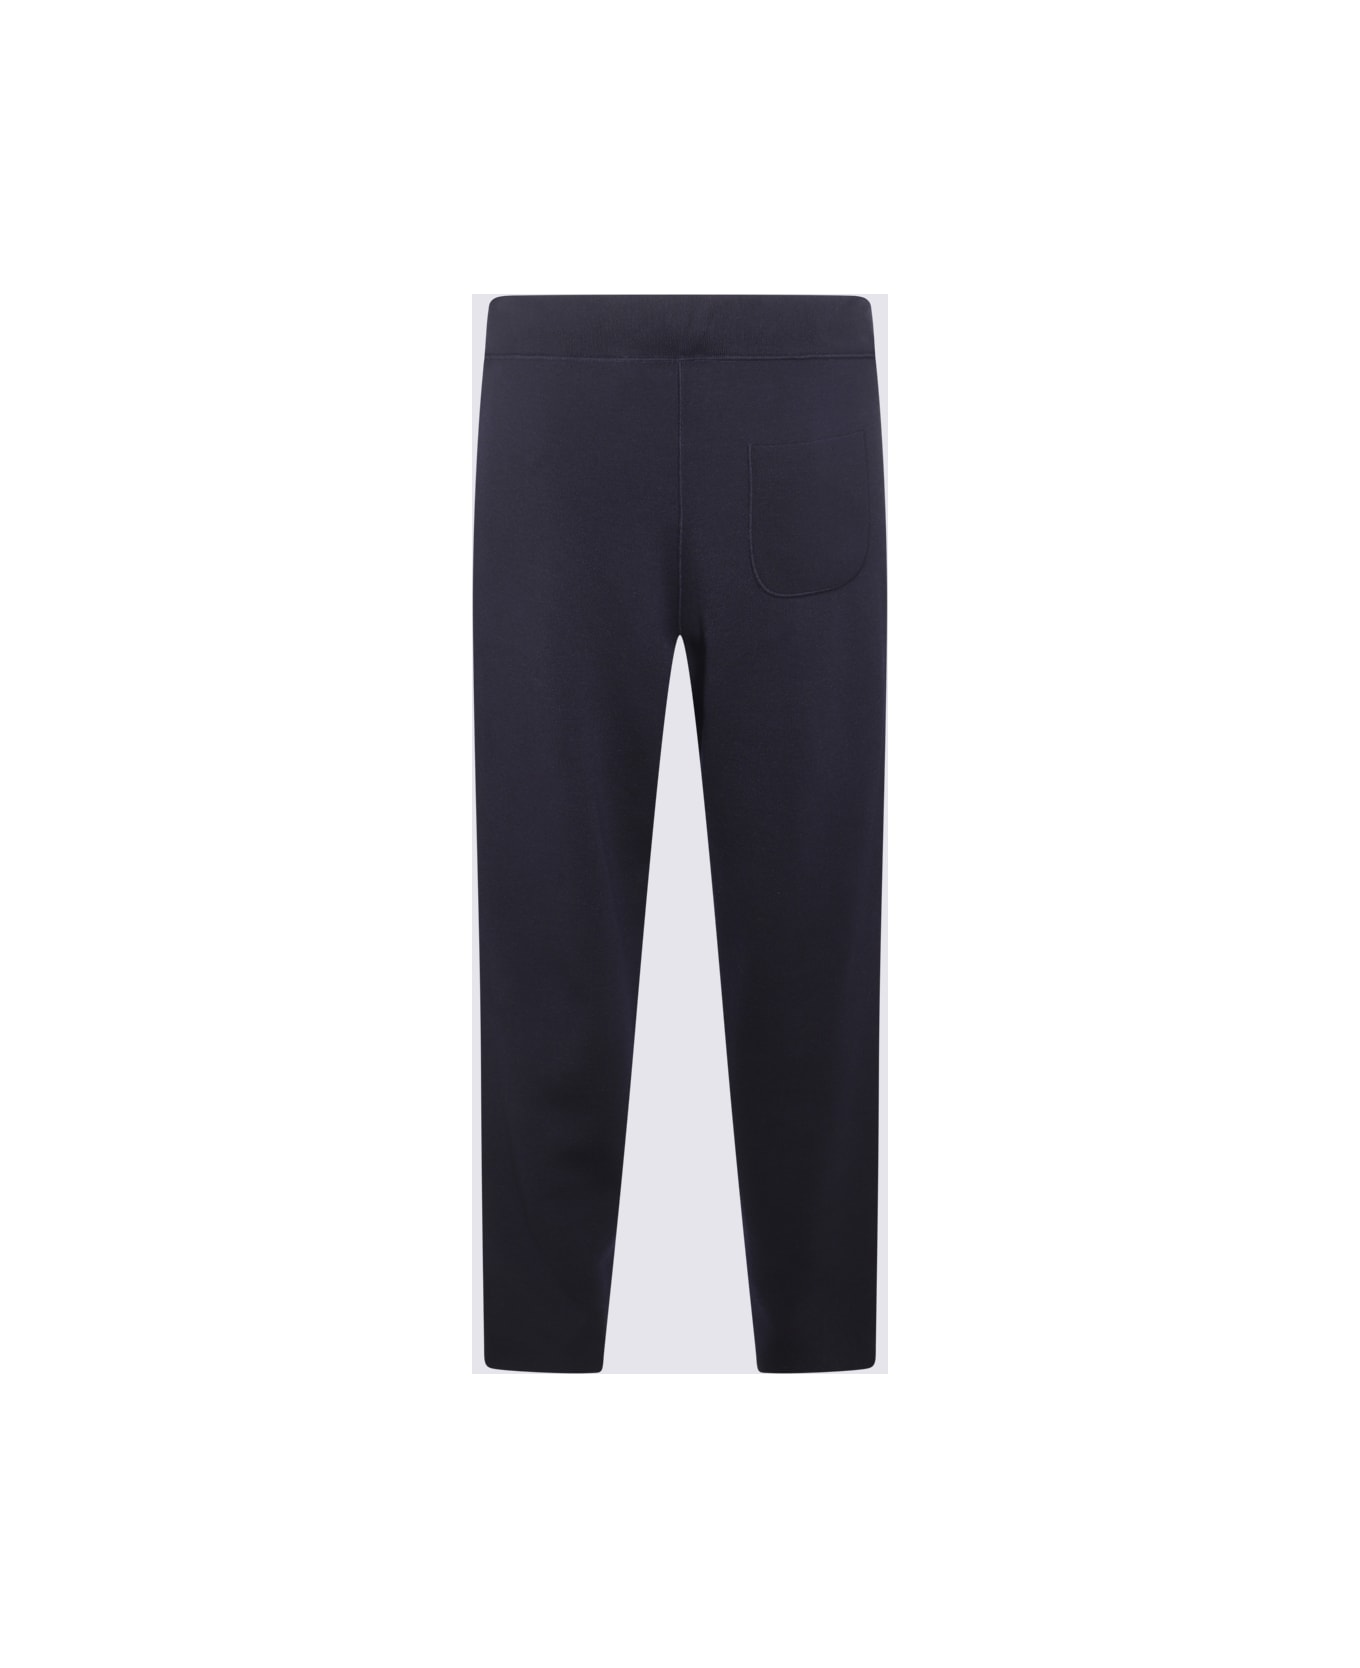 Brioni Navy Cotton Cashmere And Silk Blend Pants - Blue ボトムス